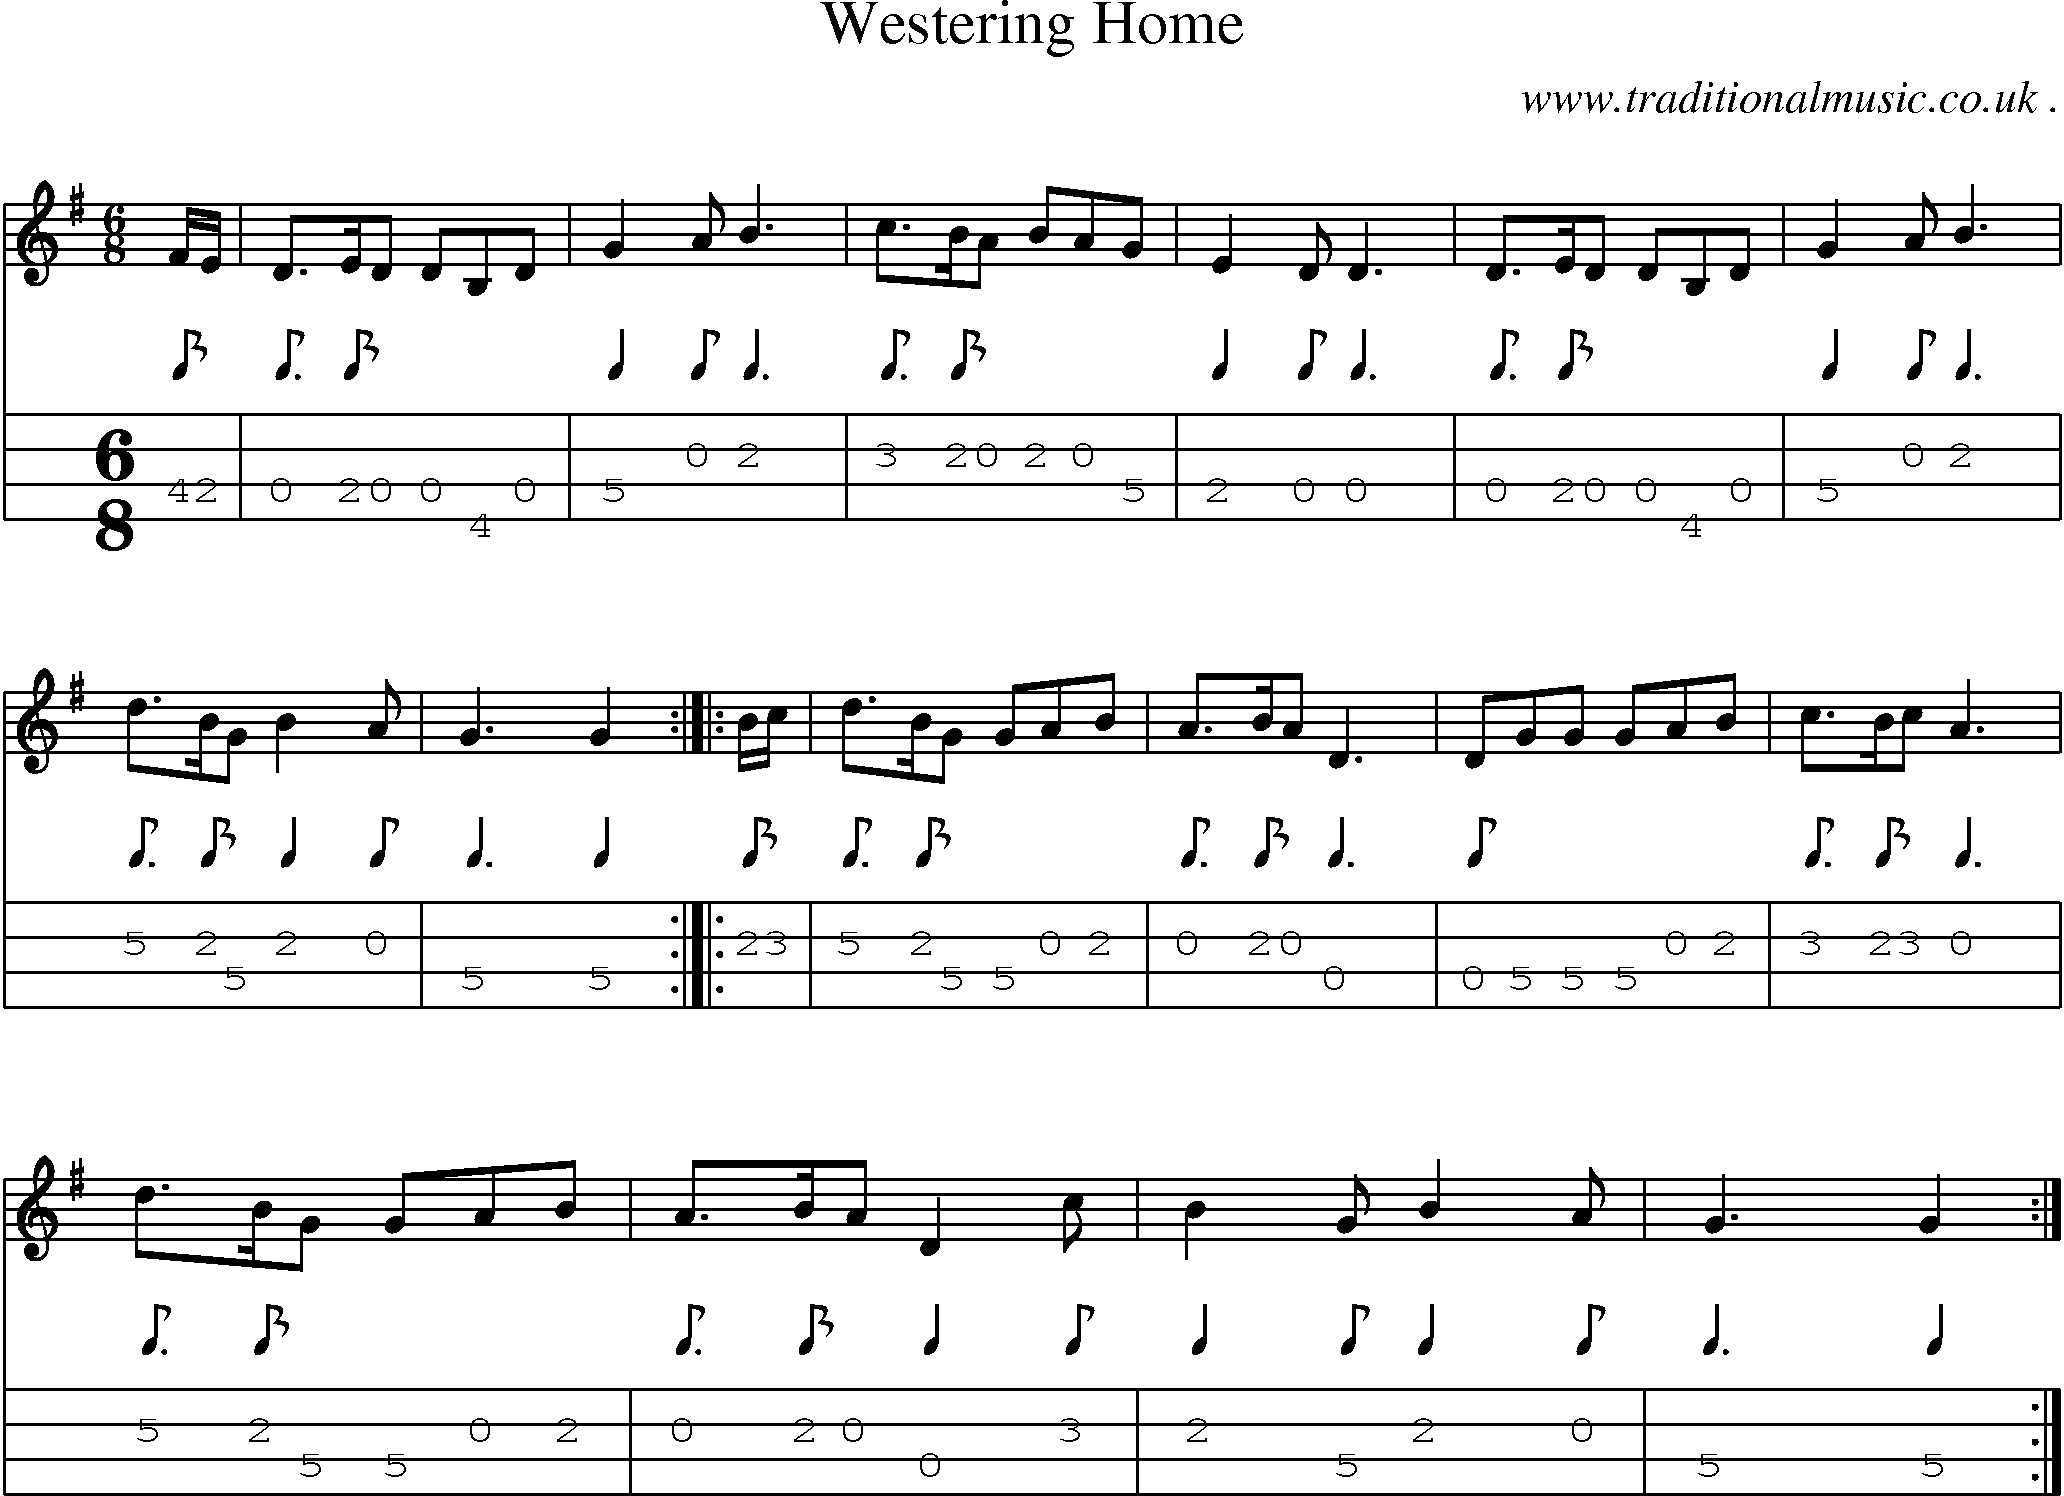 Sheet-music  score, Chords and Mandolin Tabs for Westering Home